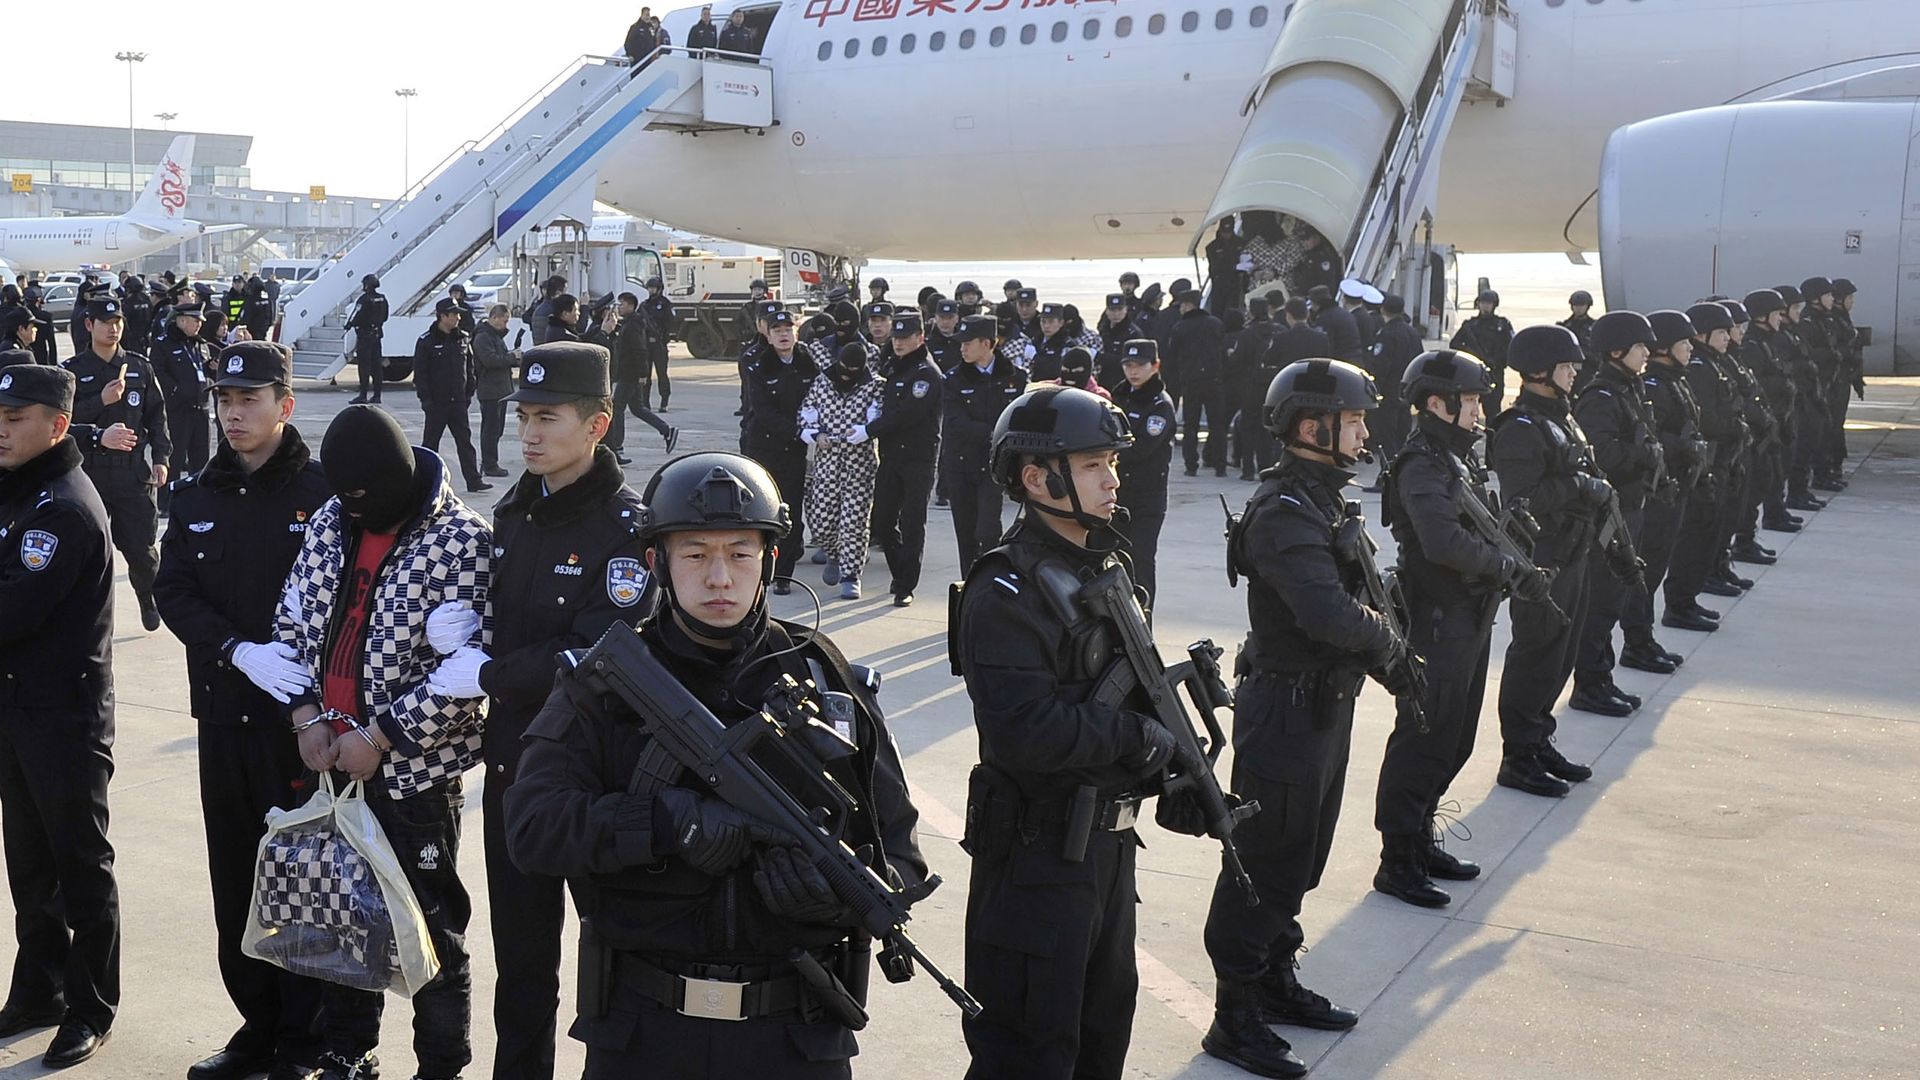 104 telecom fraud suspects returned to China under police escort at airport strip.